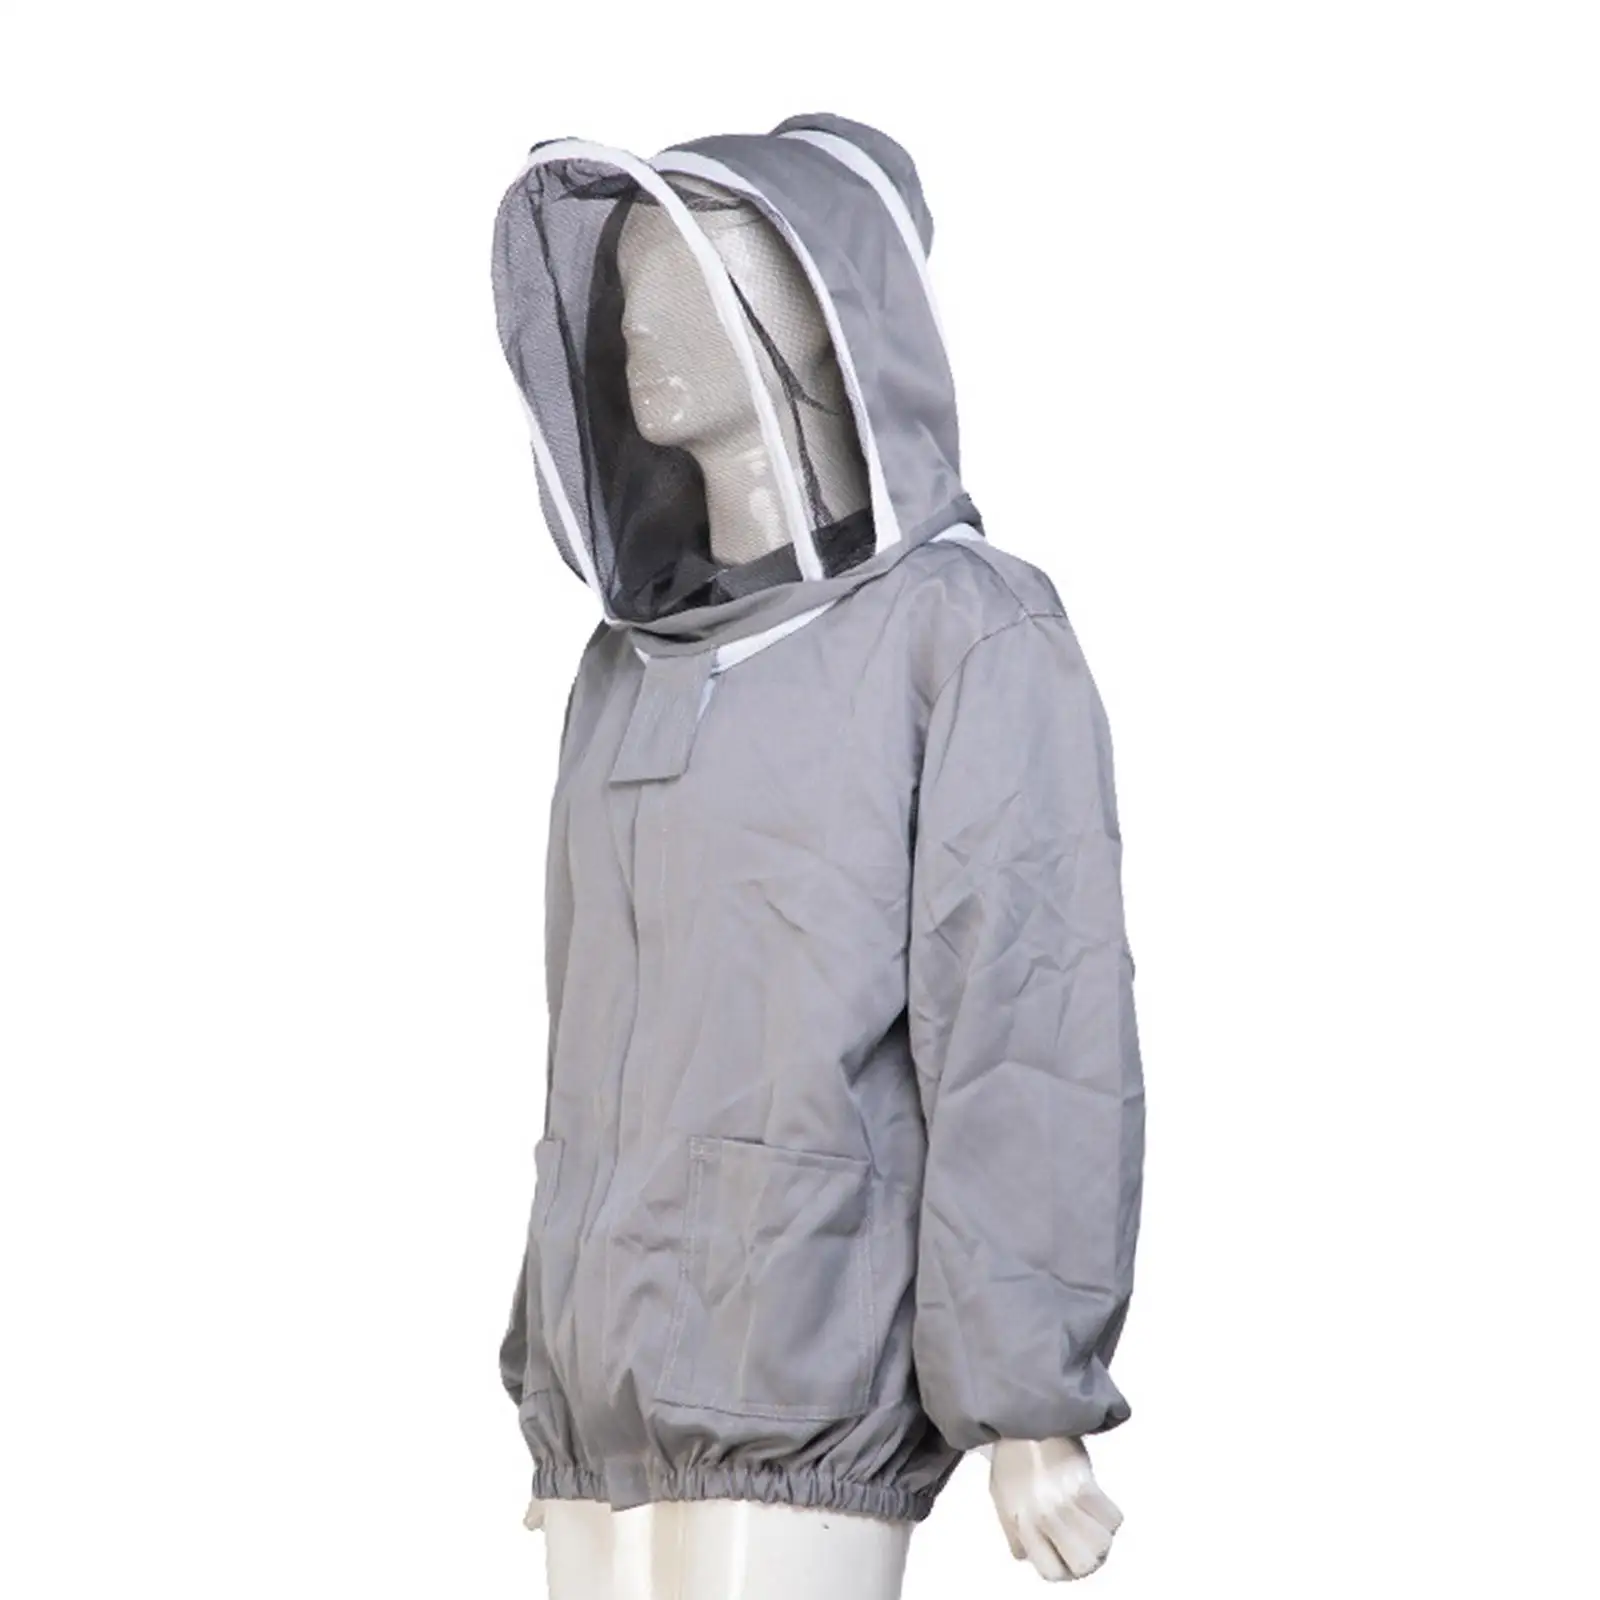 Beekeeper Field Work Jackets with Hat Equip suit with Fencing Veil Hood Farm Keeping Smock Suit for Beginners Beekeepers